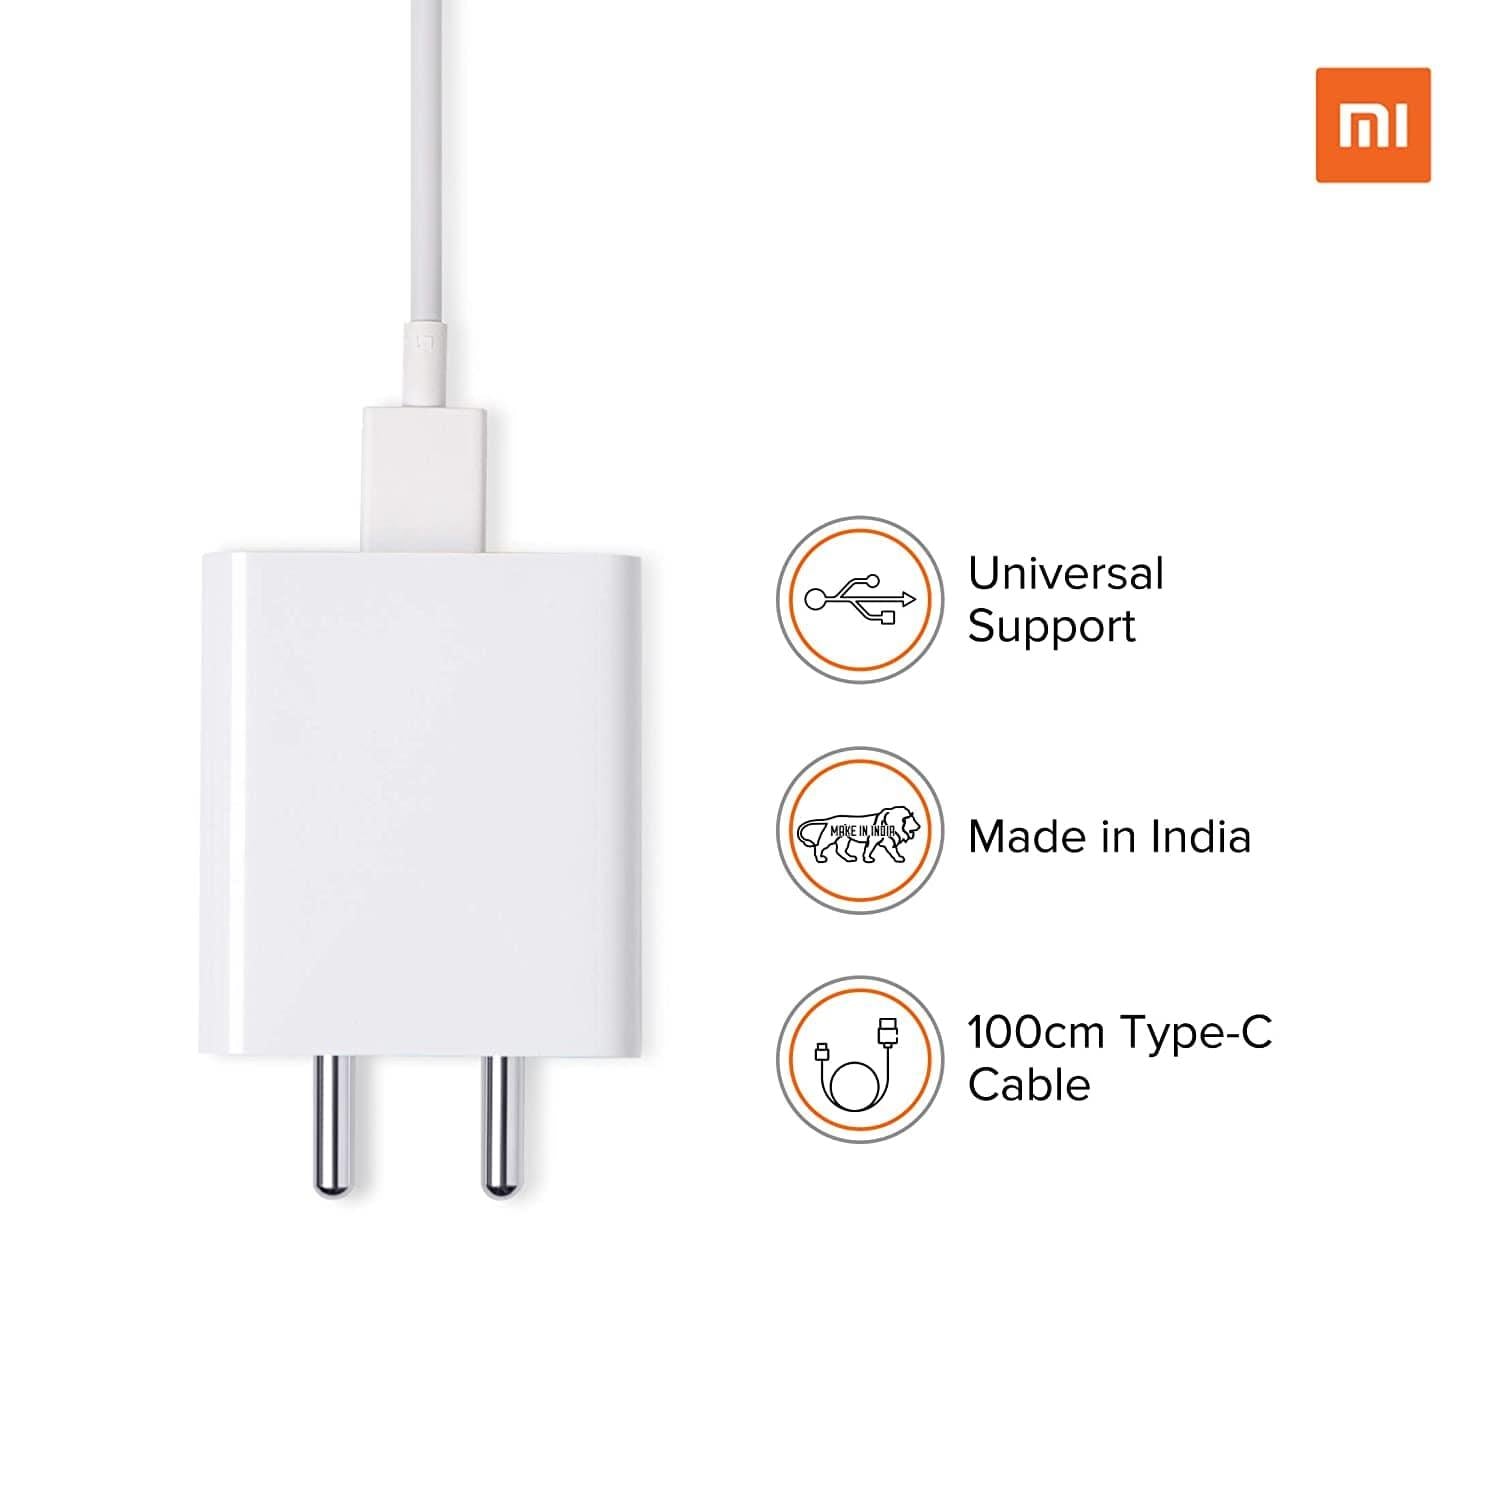 Mi 33W SonicCharge 2.0 Charger Combo-Chargers-dealsplant